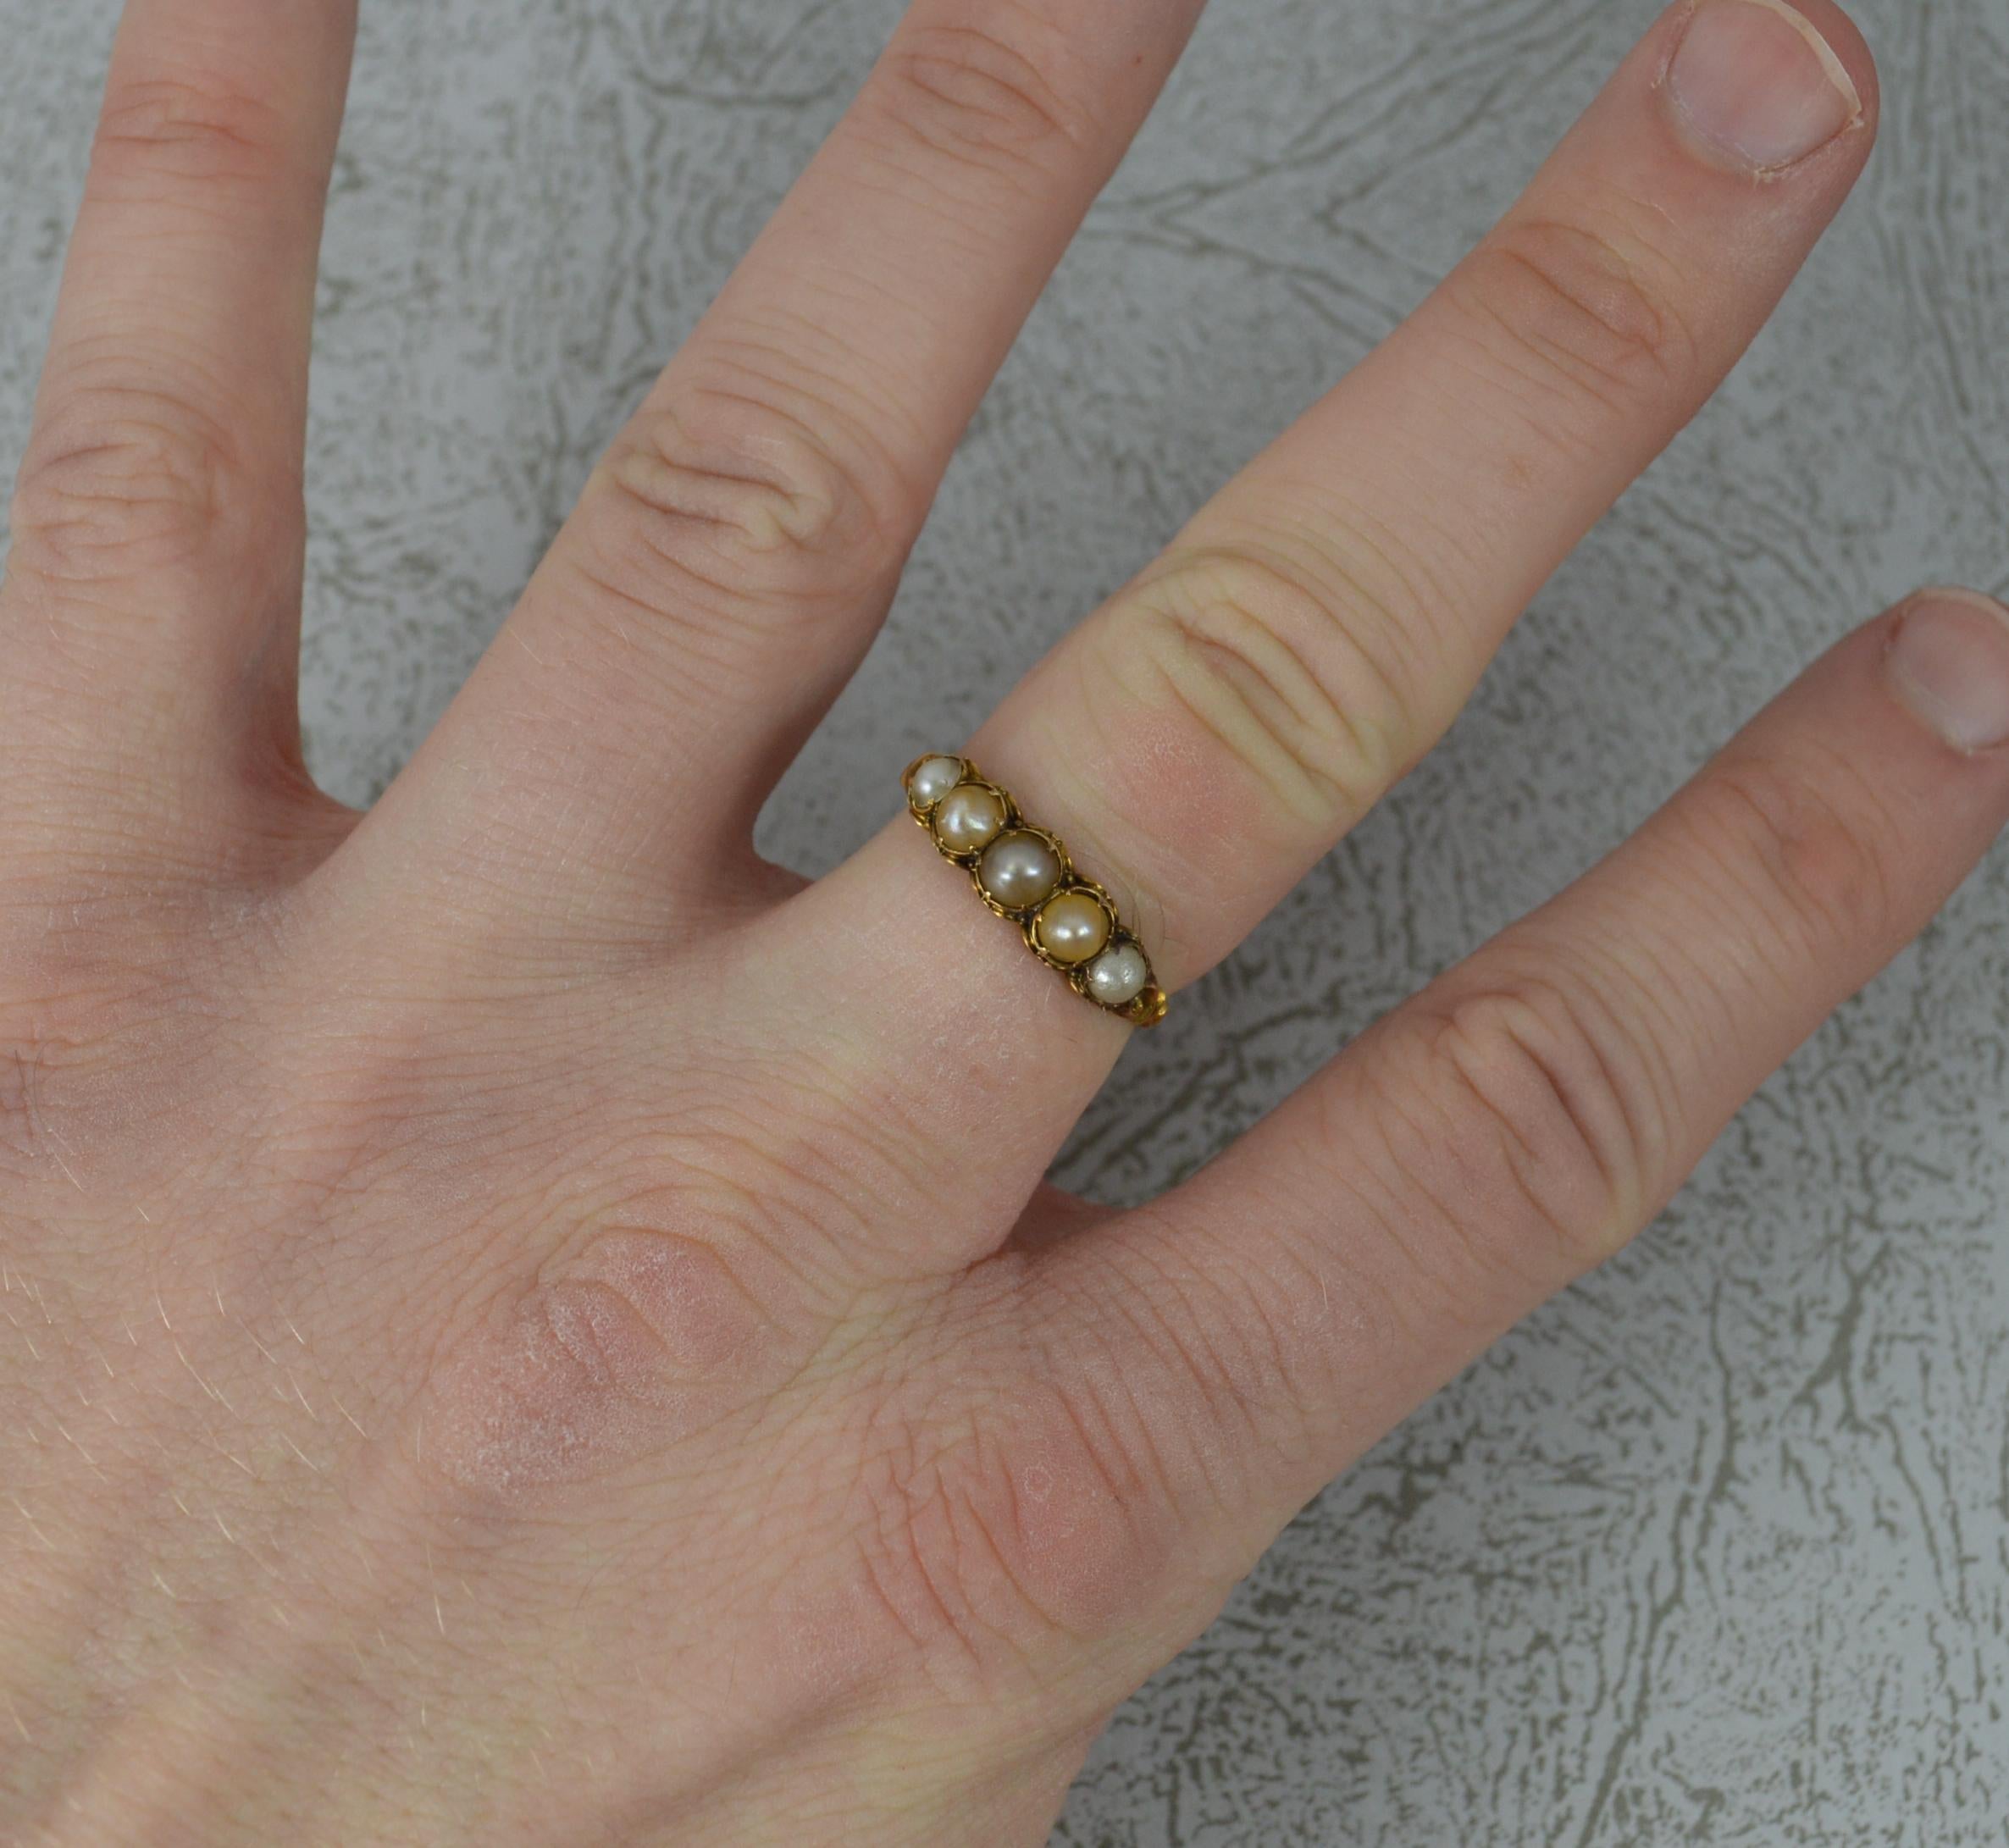 An early Victorian five stone stack ring. c1850.
Solid 18 carat yellow gold example.
Set with five pearls. 17mm spread of stones. 5.2mm wide band to front.
Size O UK, 7 1/2 US. 1.8 grams. 
Very good overall condition, light wear, tests as 18ct.